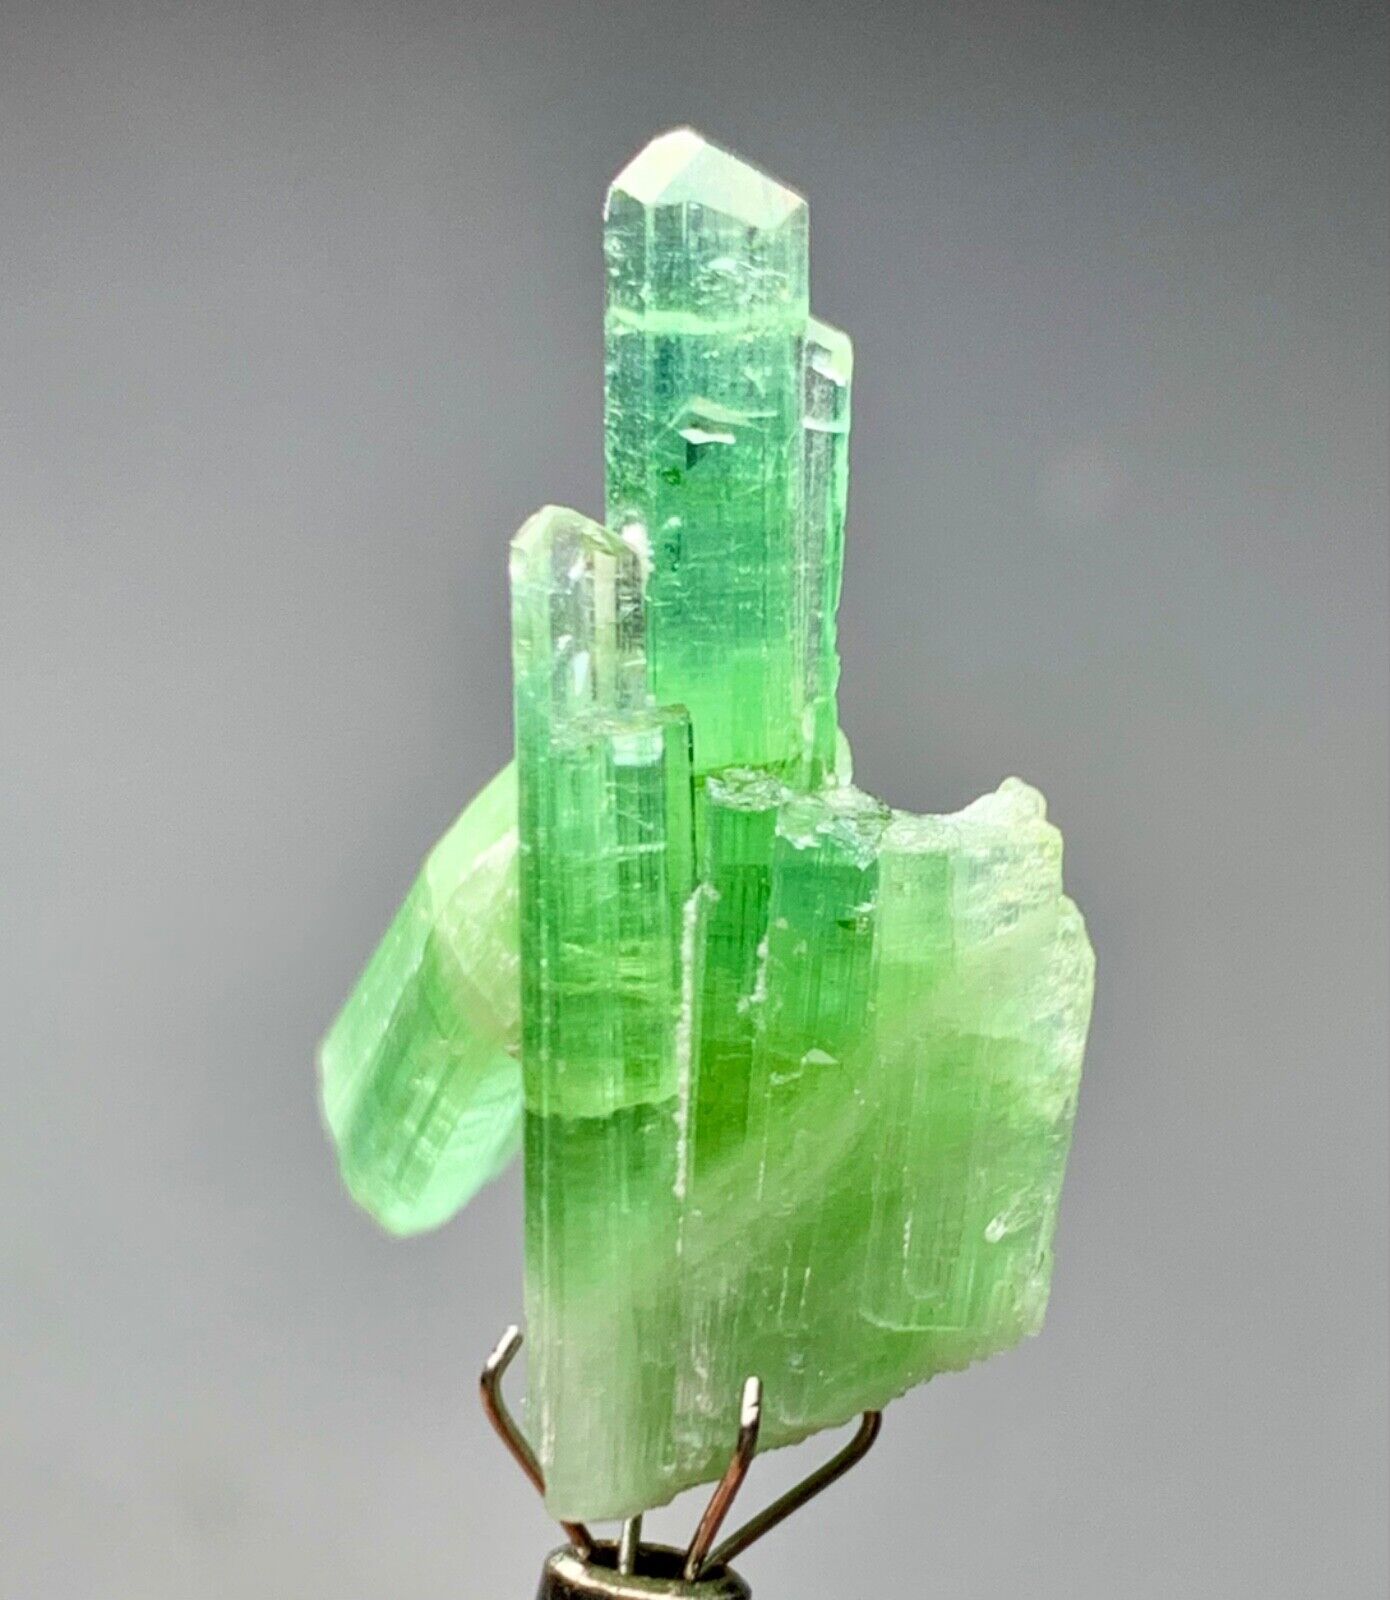 23 Cts Beautiful Termineted Tourmaline Crystal Bunch from Afghanistan